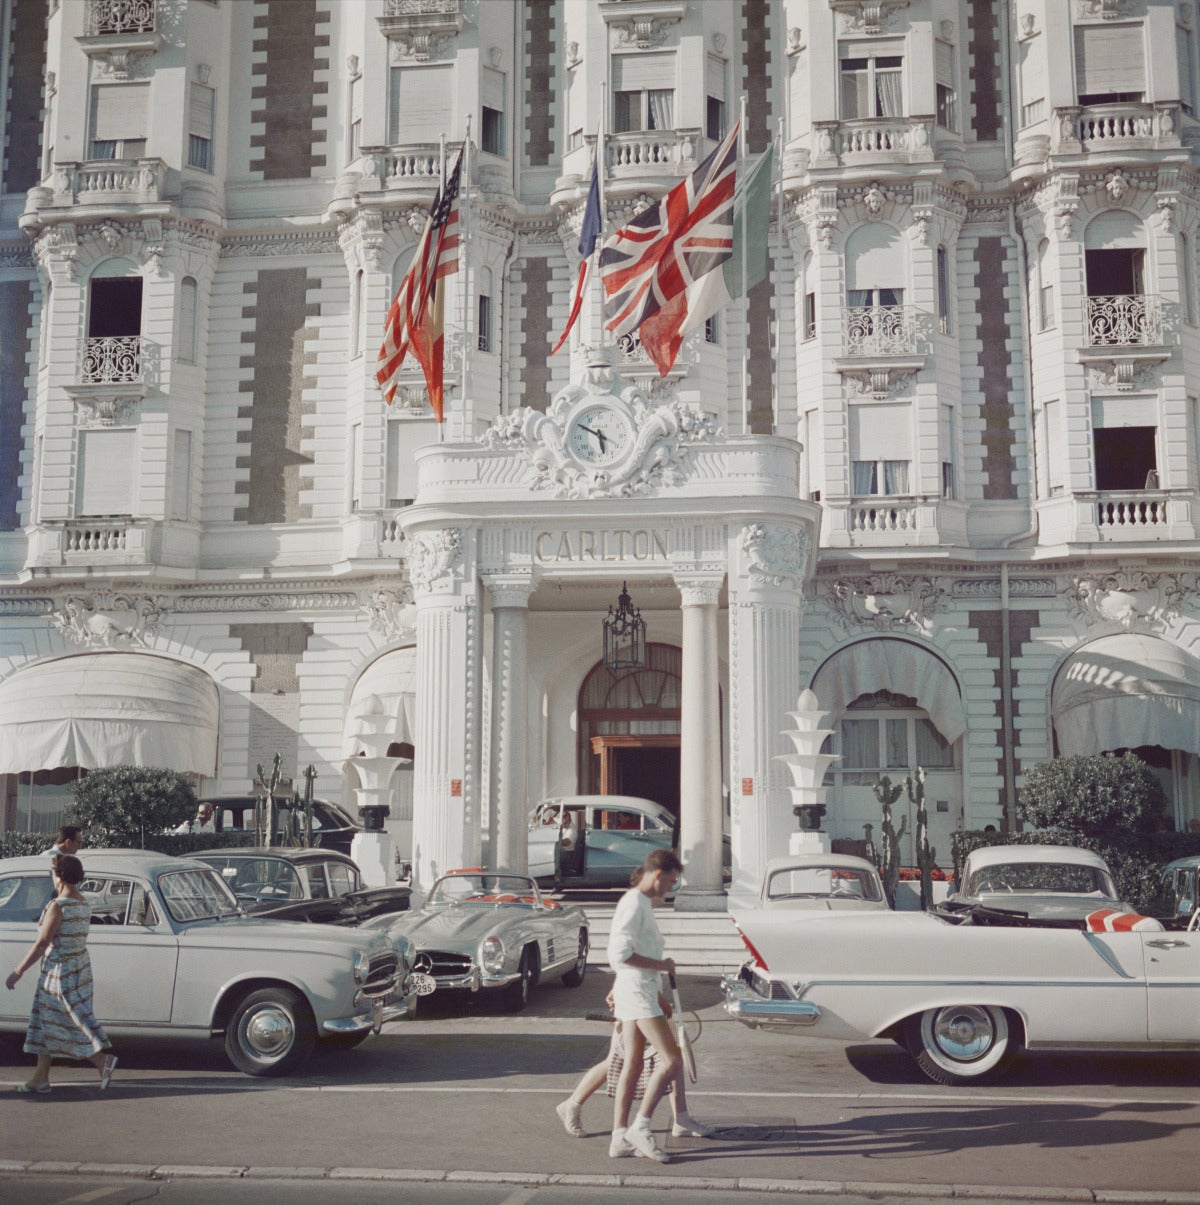 Carlton Hotel
1958 (printed later)
C print
50 x 50 inches 
Estate stamped and hand numbered edition of 150 with certificate of authenticity from the estate. 

The entrance to the Carlton Hotel, Cannes, France, 1958. 

Print is also available in 16 x